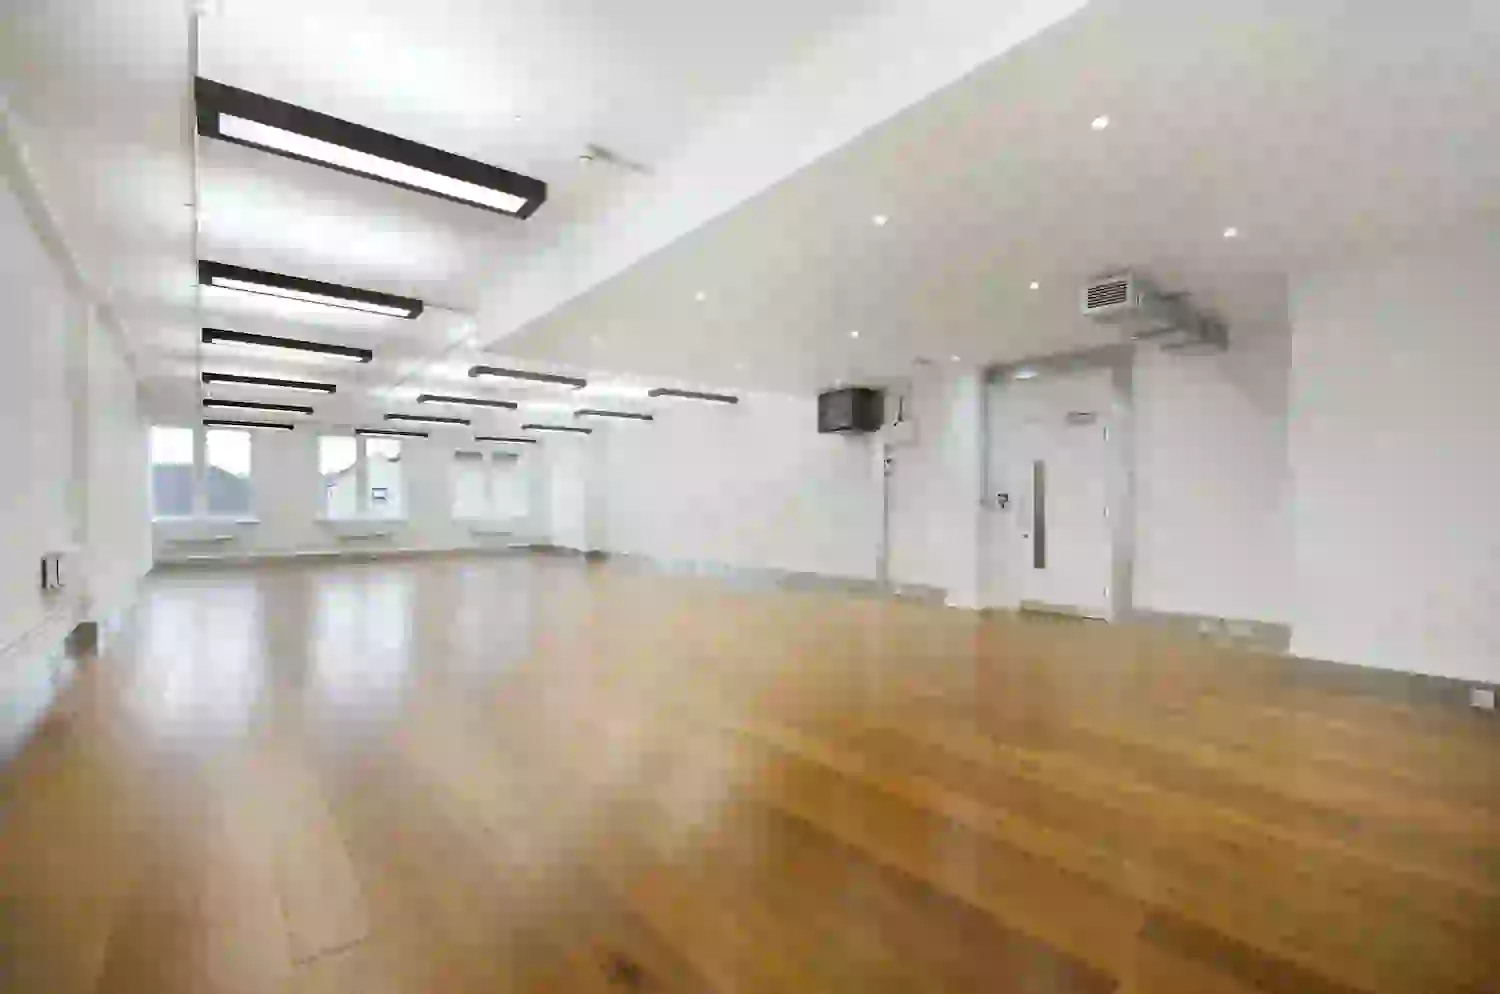 Office space to rent at Wenlock Studios, 50-52 Wharf Road, Islington, London, unit WR.2.04, 1348 sq ft (125 sq m).